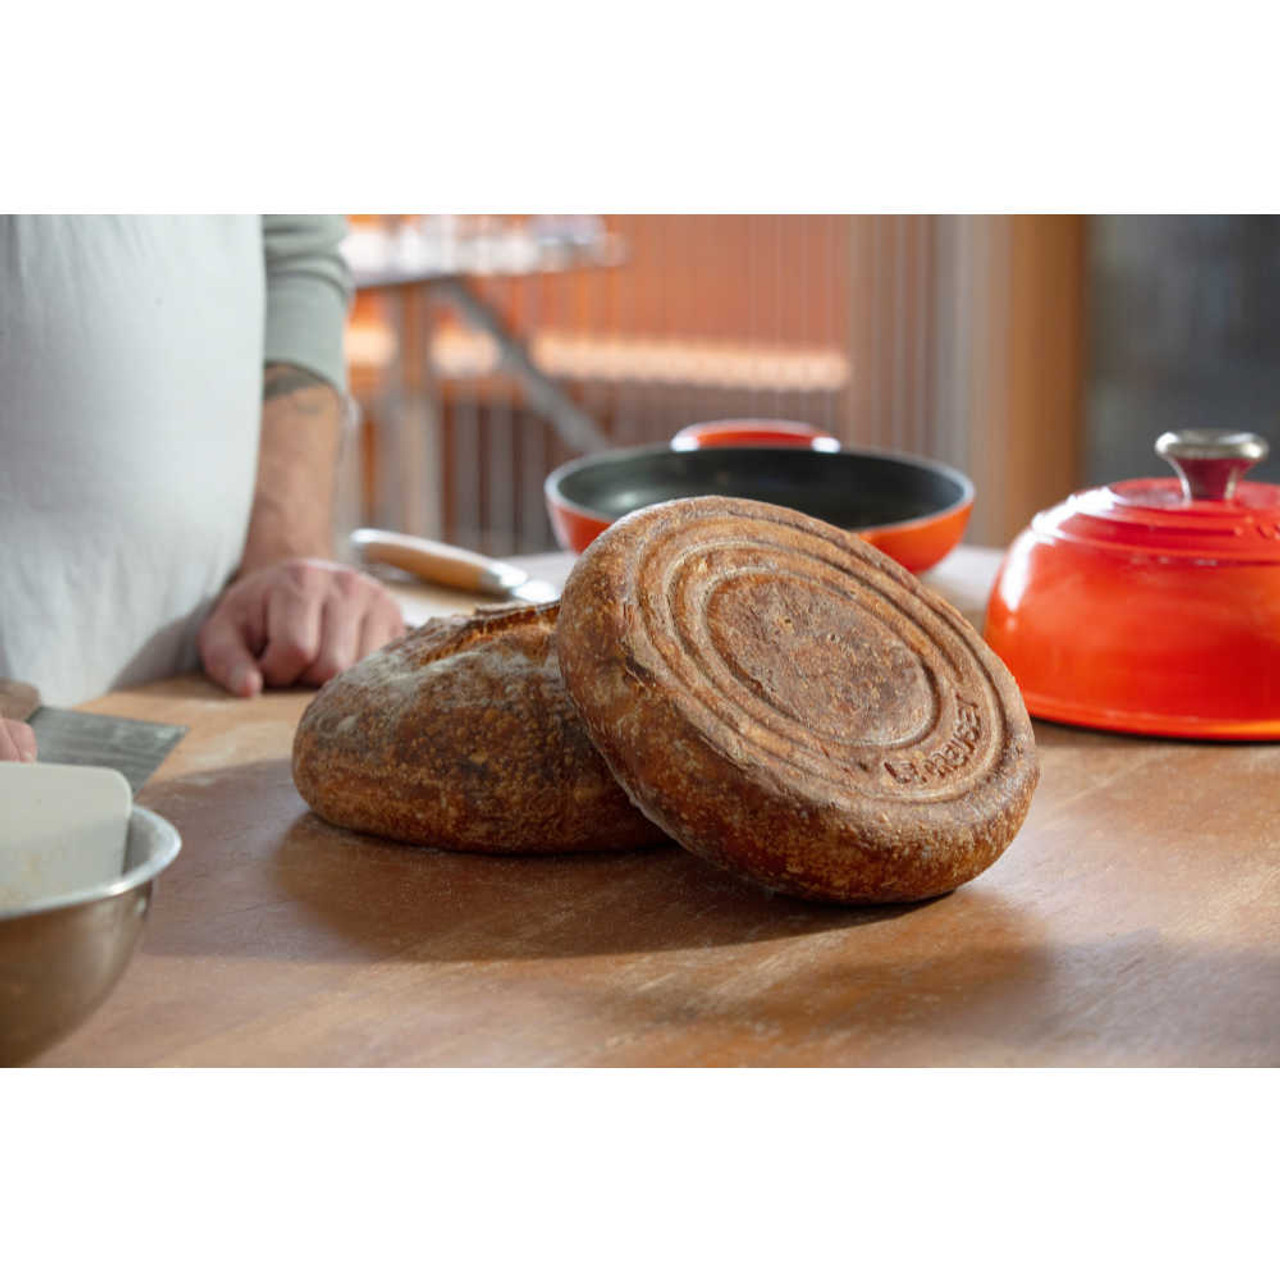 https://cdn11.bigcommerce.com/s-hccytny0od/images/stencil/1280x1280/products/4526/18101/Le_Creuset_Cast_Iron_Bread_Oven__34806.1646884662.jpg?c=2?imbypass=on